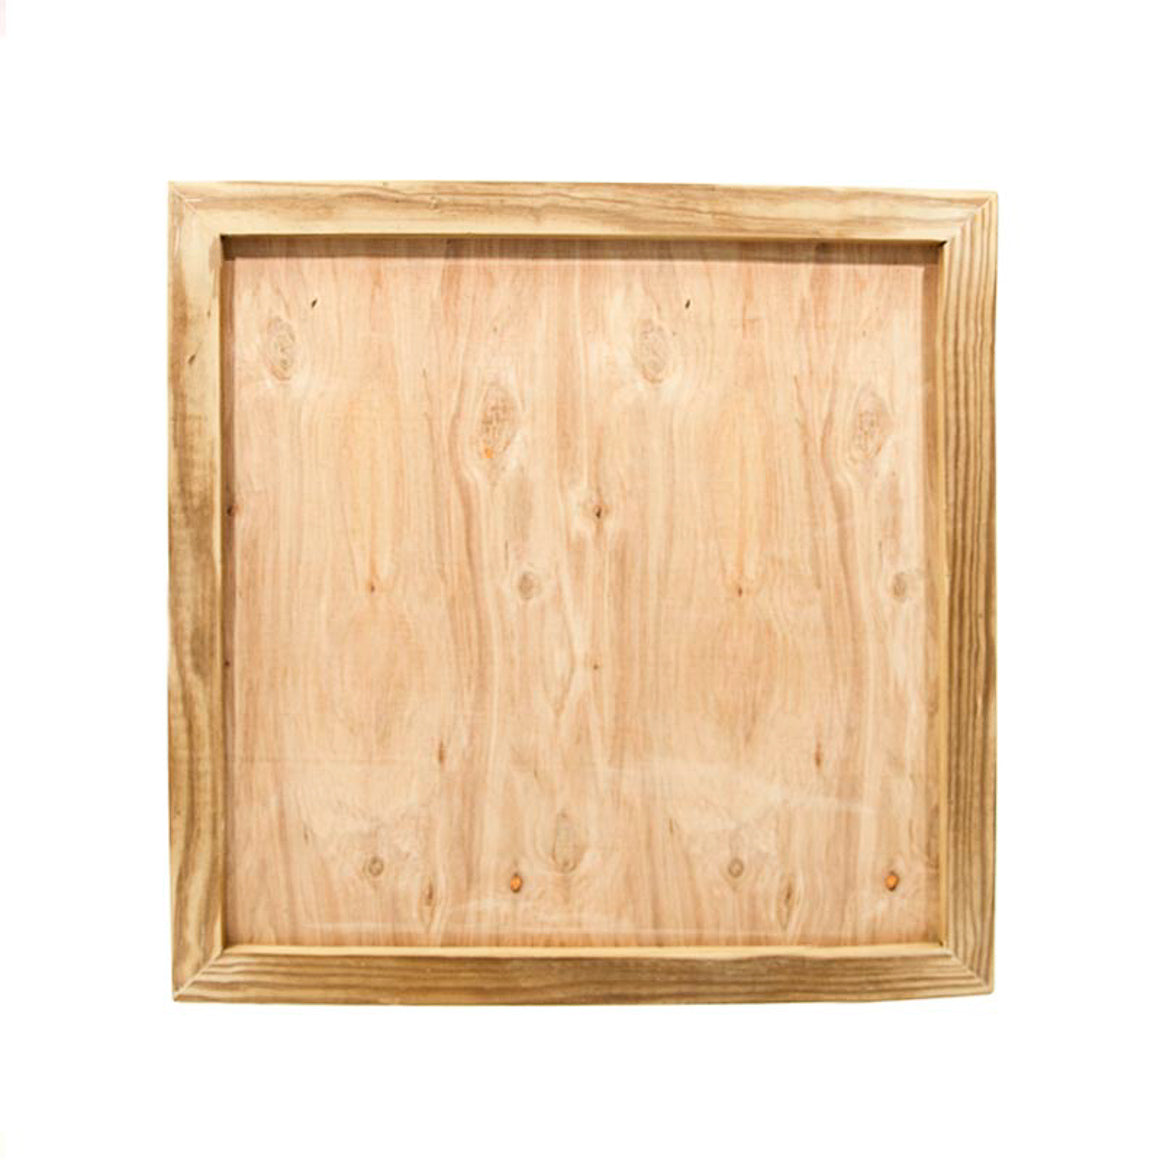 Wooden Frame - Large Square - 18in x 18in